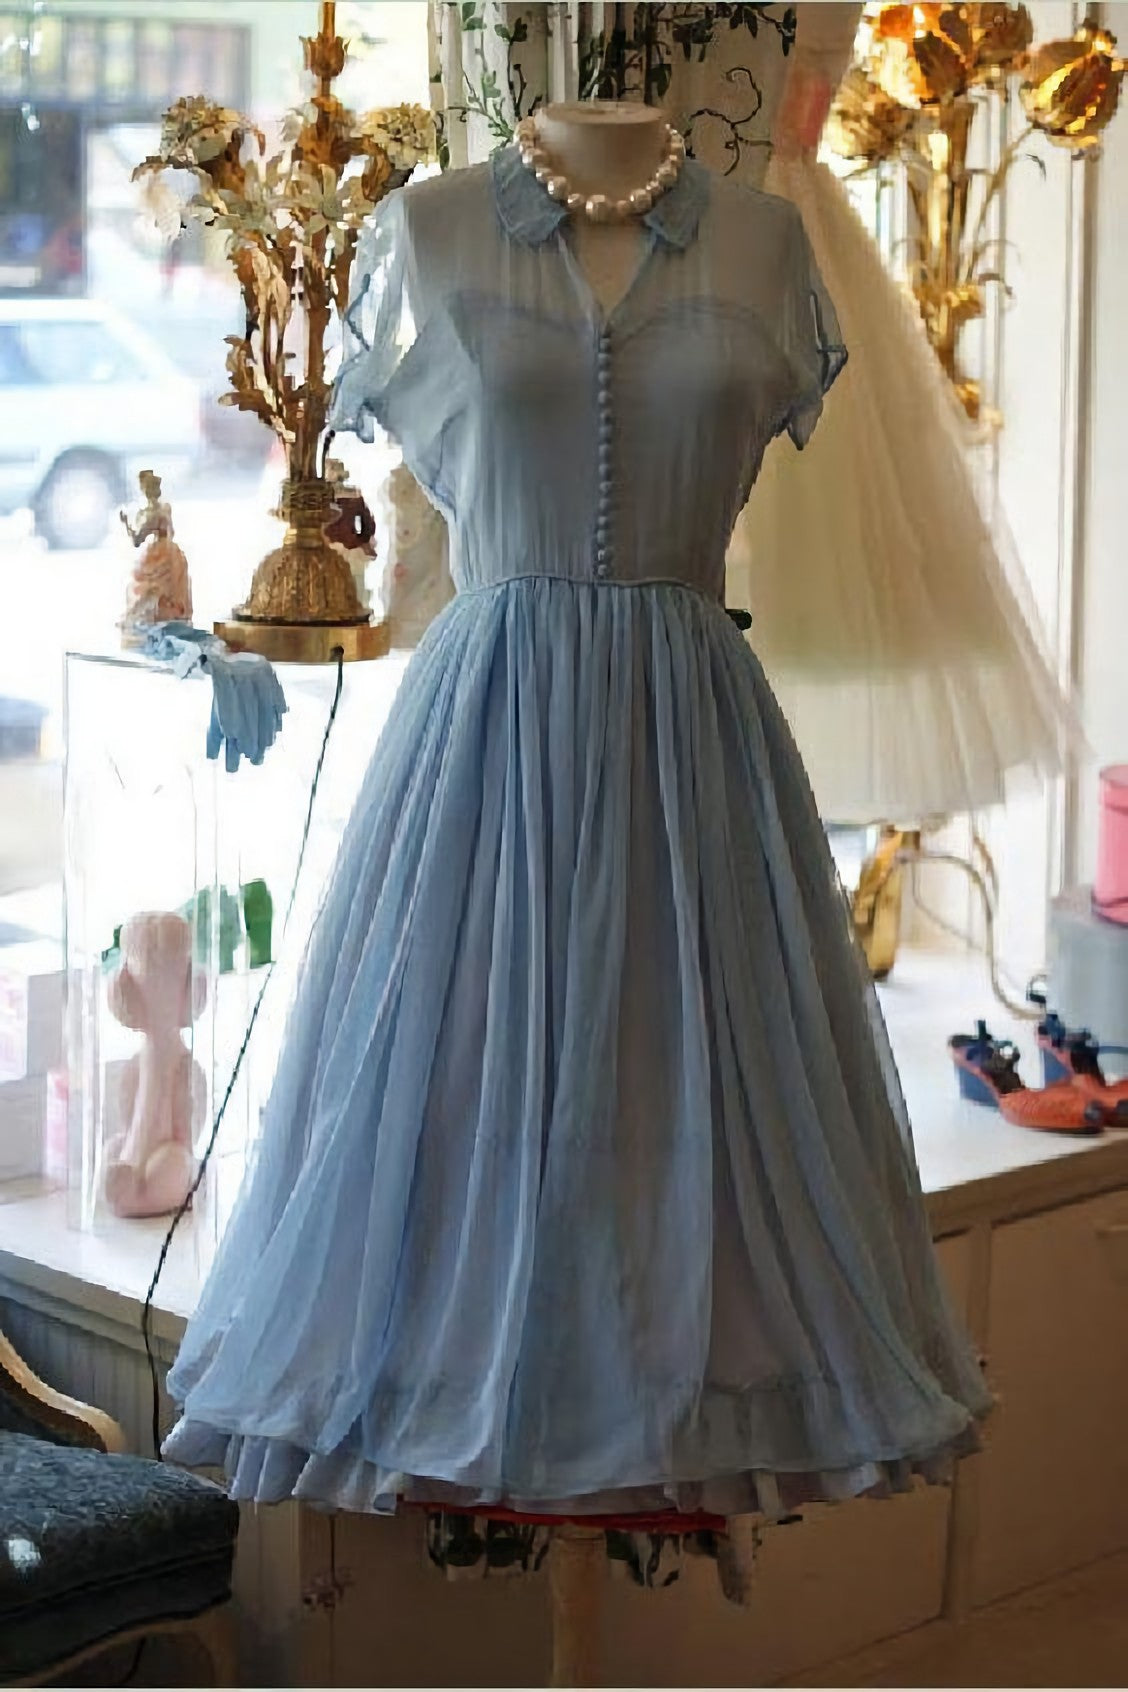 Light Dresses, Chiffon Elegant A Line Doll Collar Short Sleeves Corset Homecoming Blue Chiffon Vintage Style Dress outfit, Prom Dresses Fitting